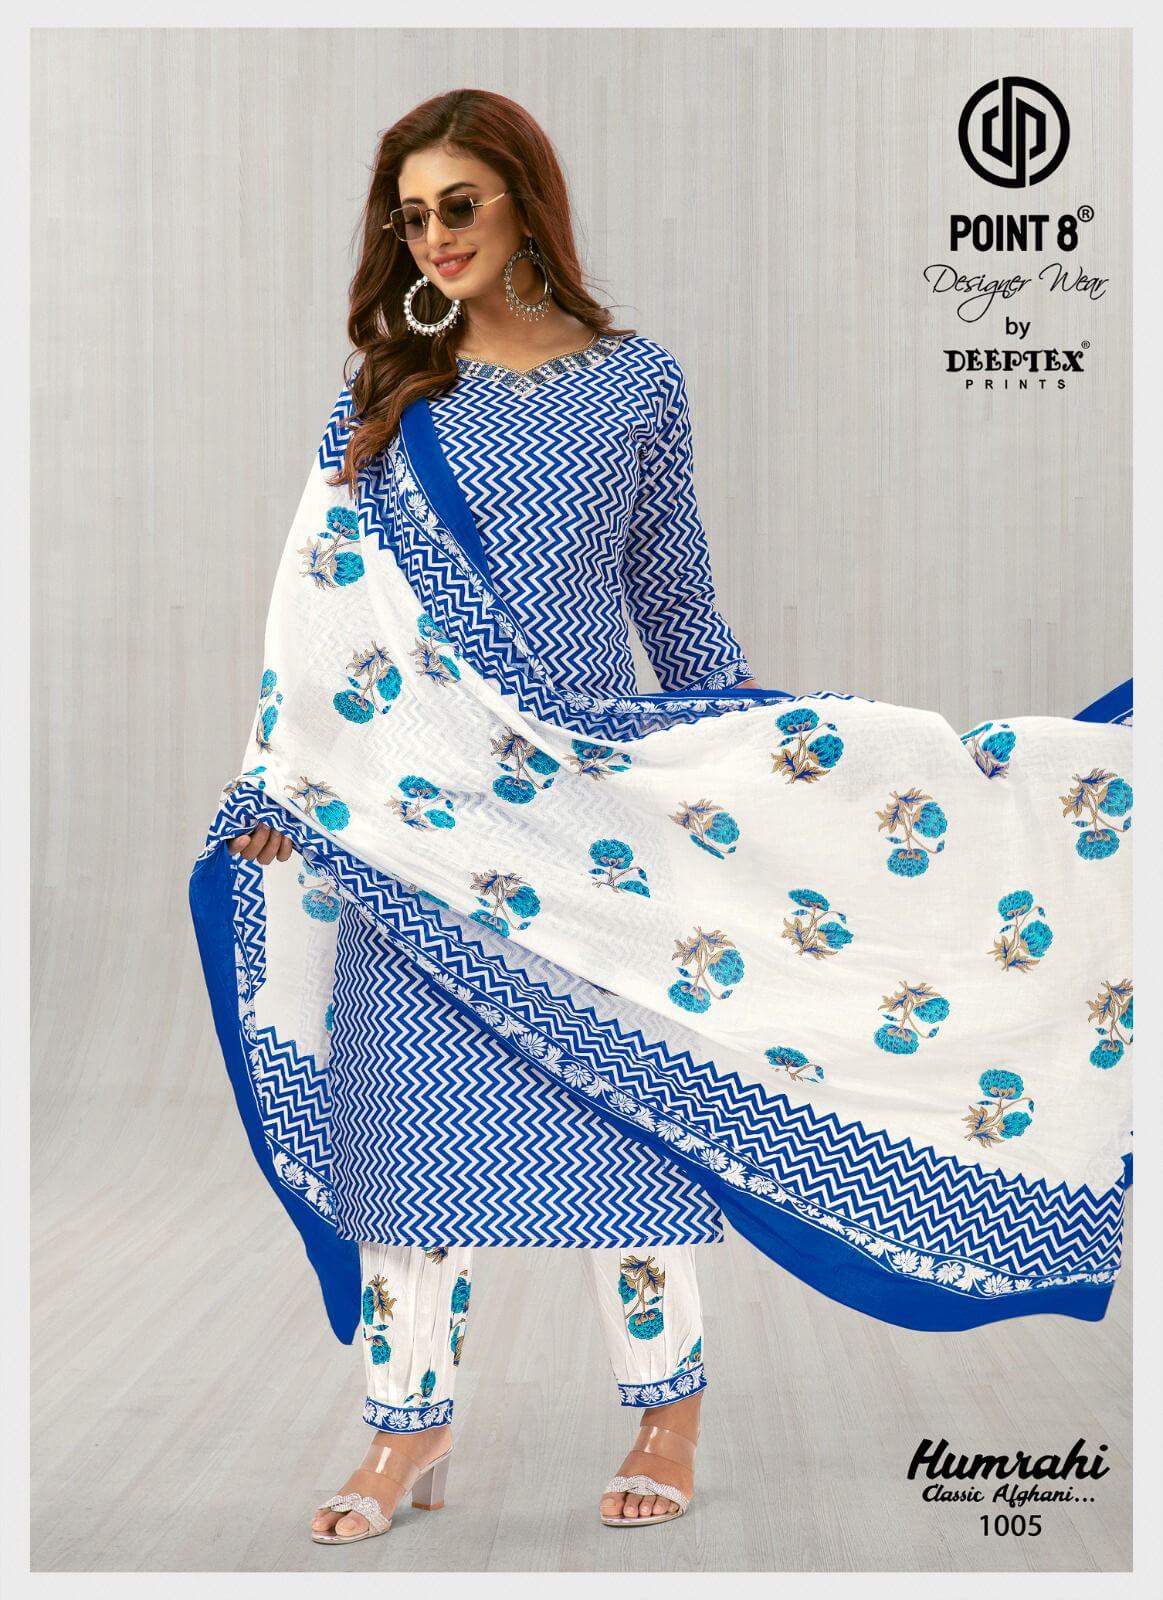 Deeptex Point 8 Humrahi vol 1 collection 2